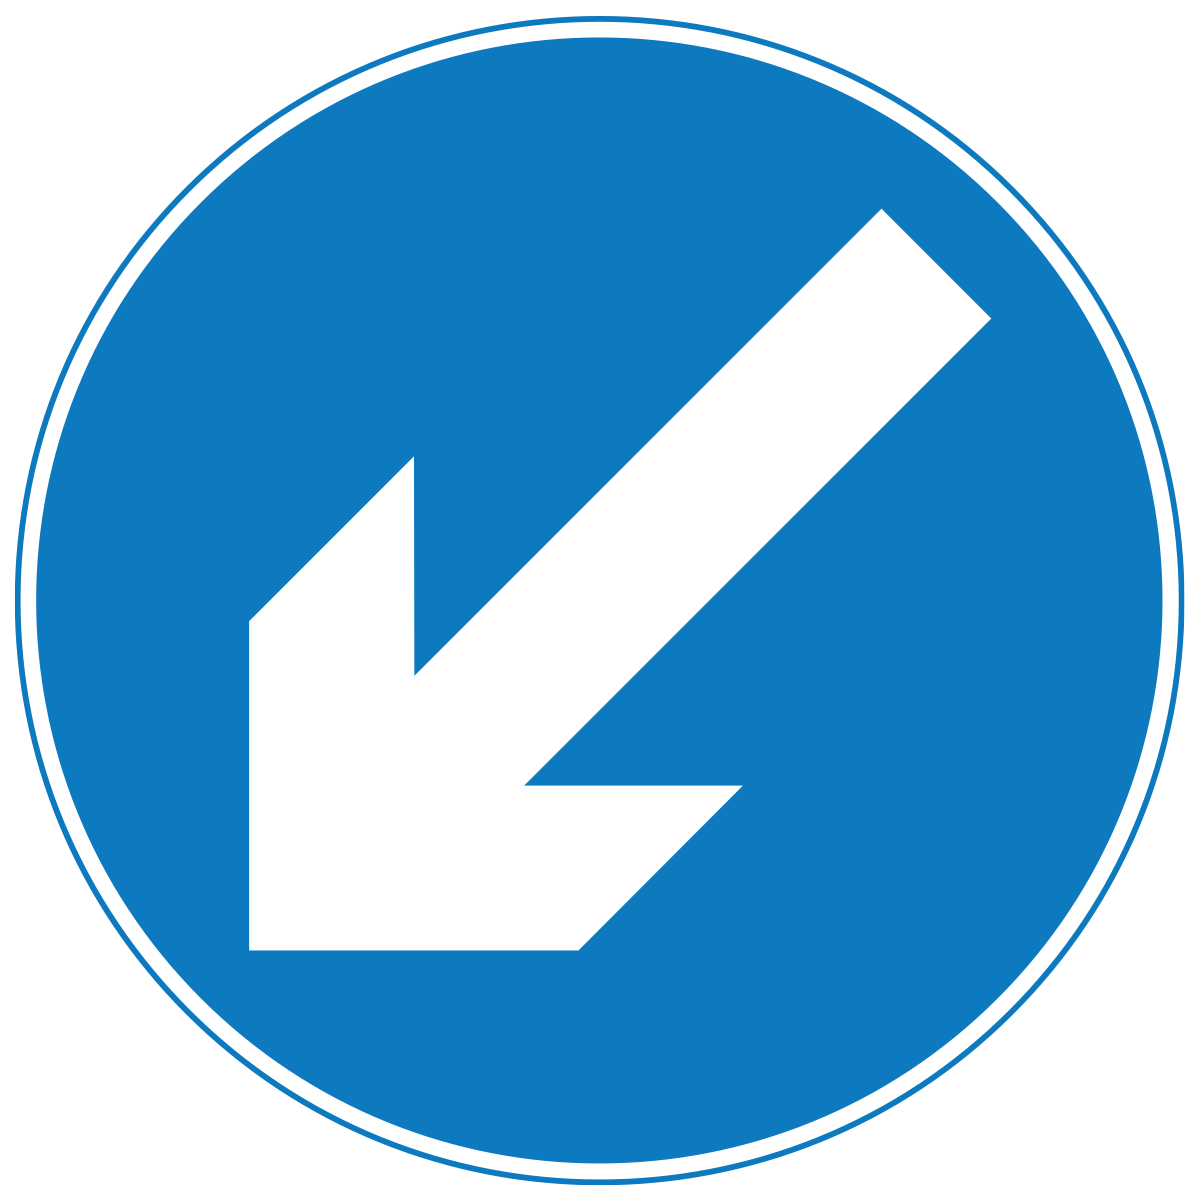 Keep left (Right if symbol is reversed)